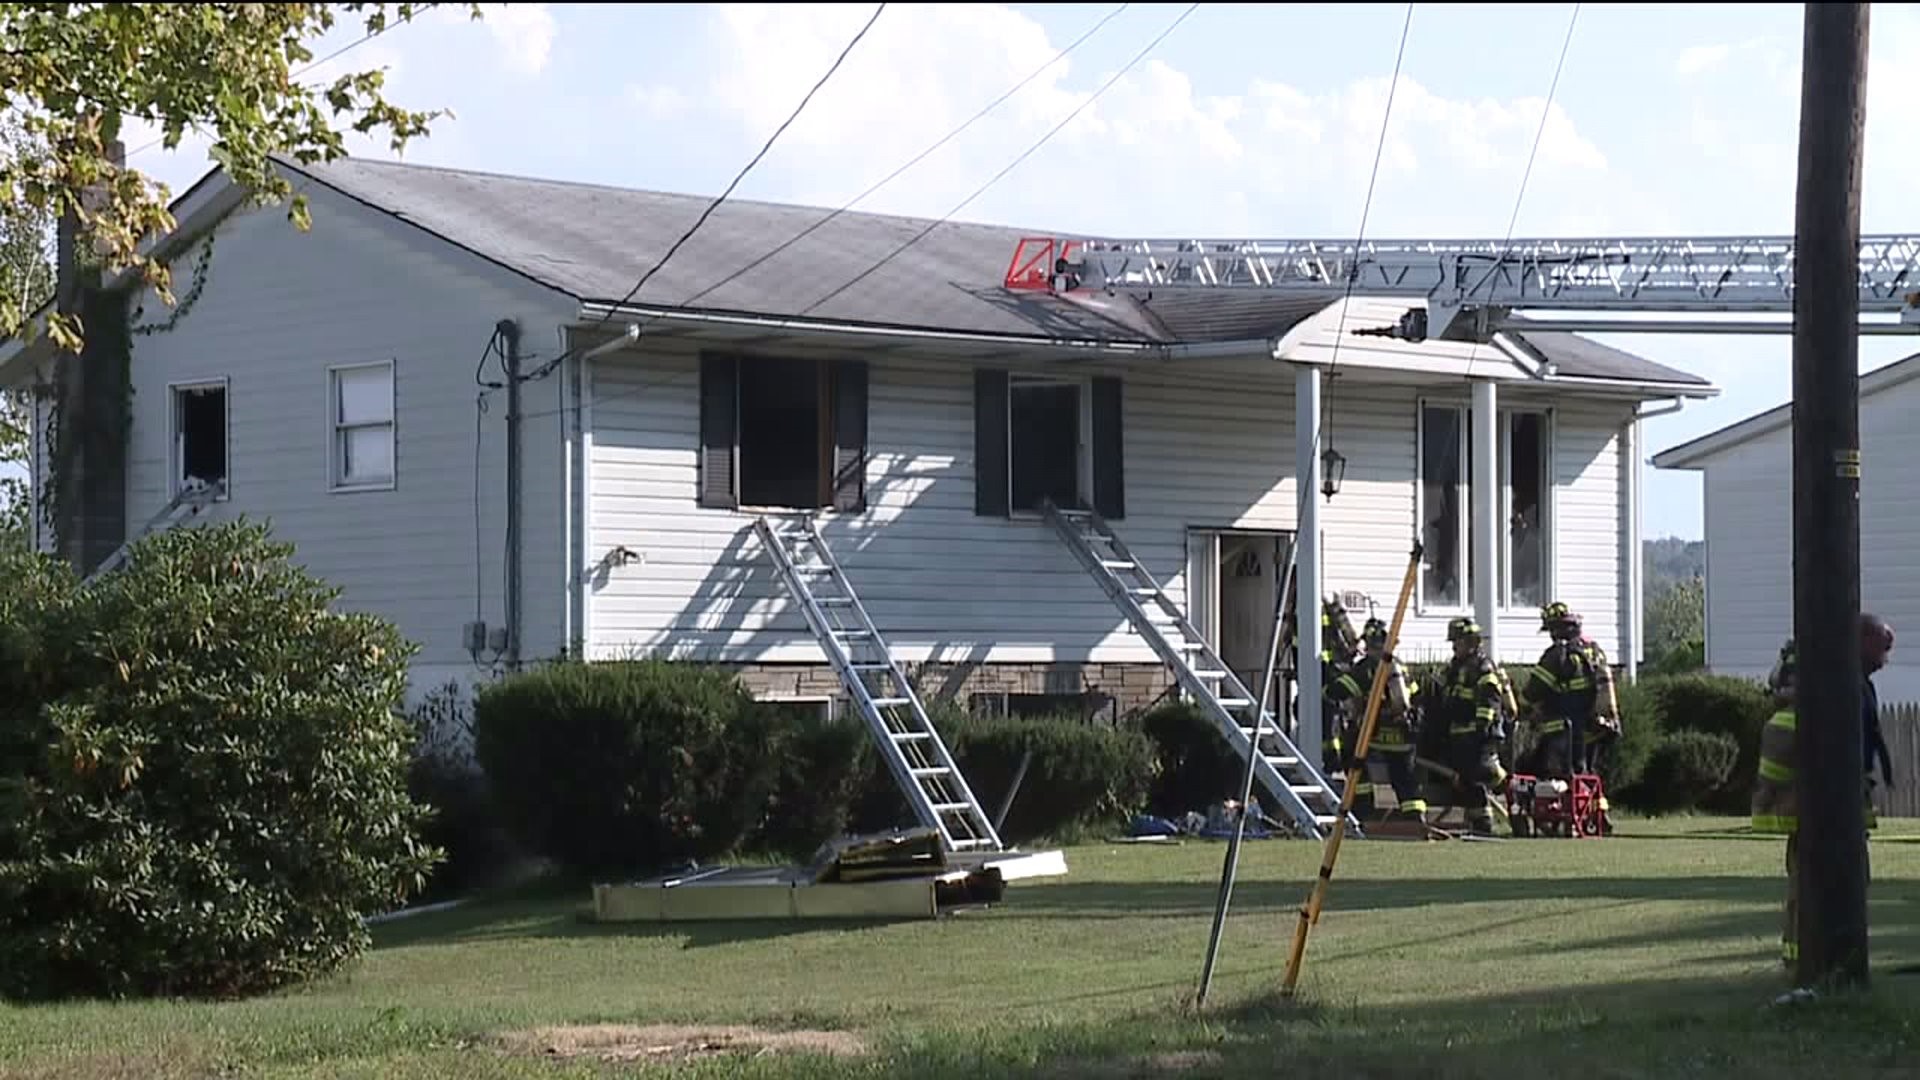 Fire Damages Home in Duryea